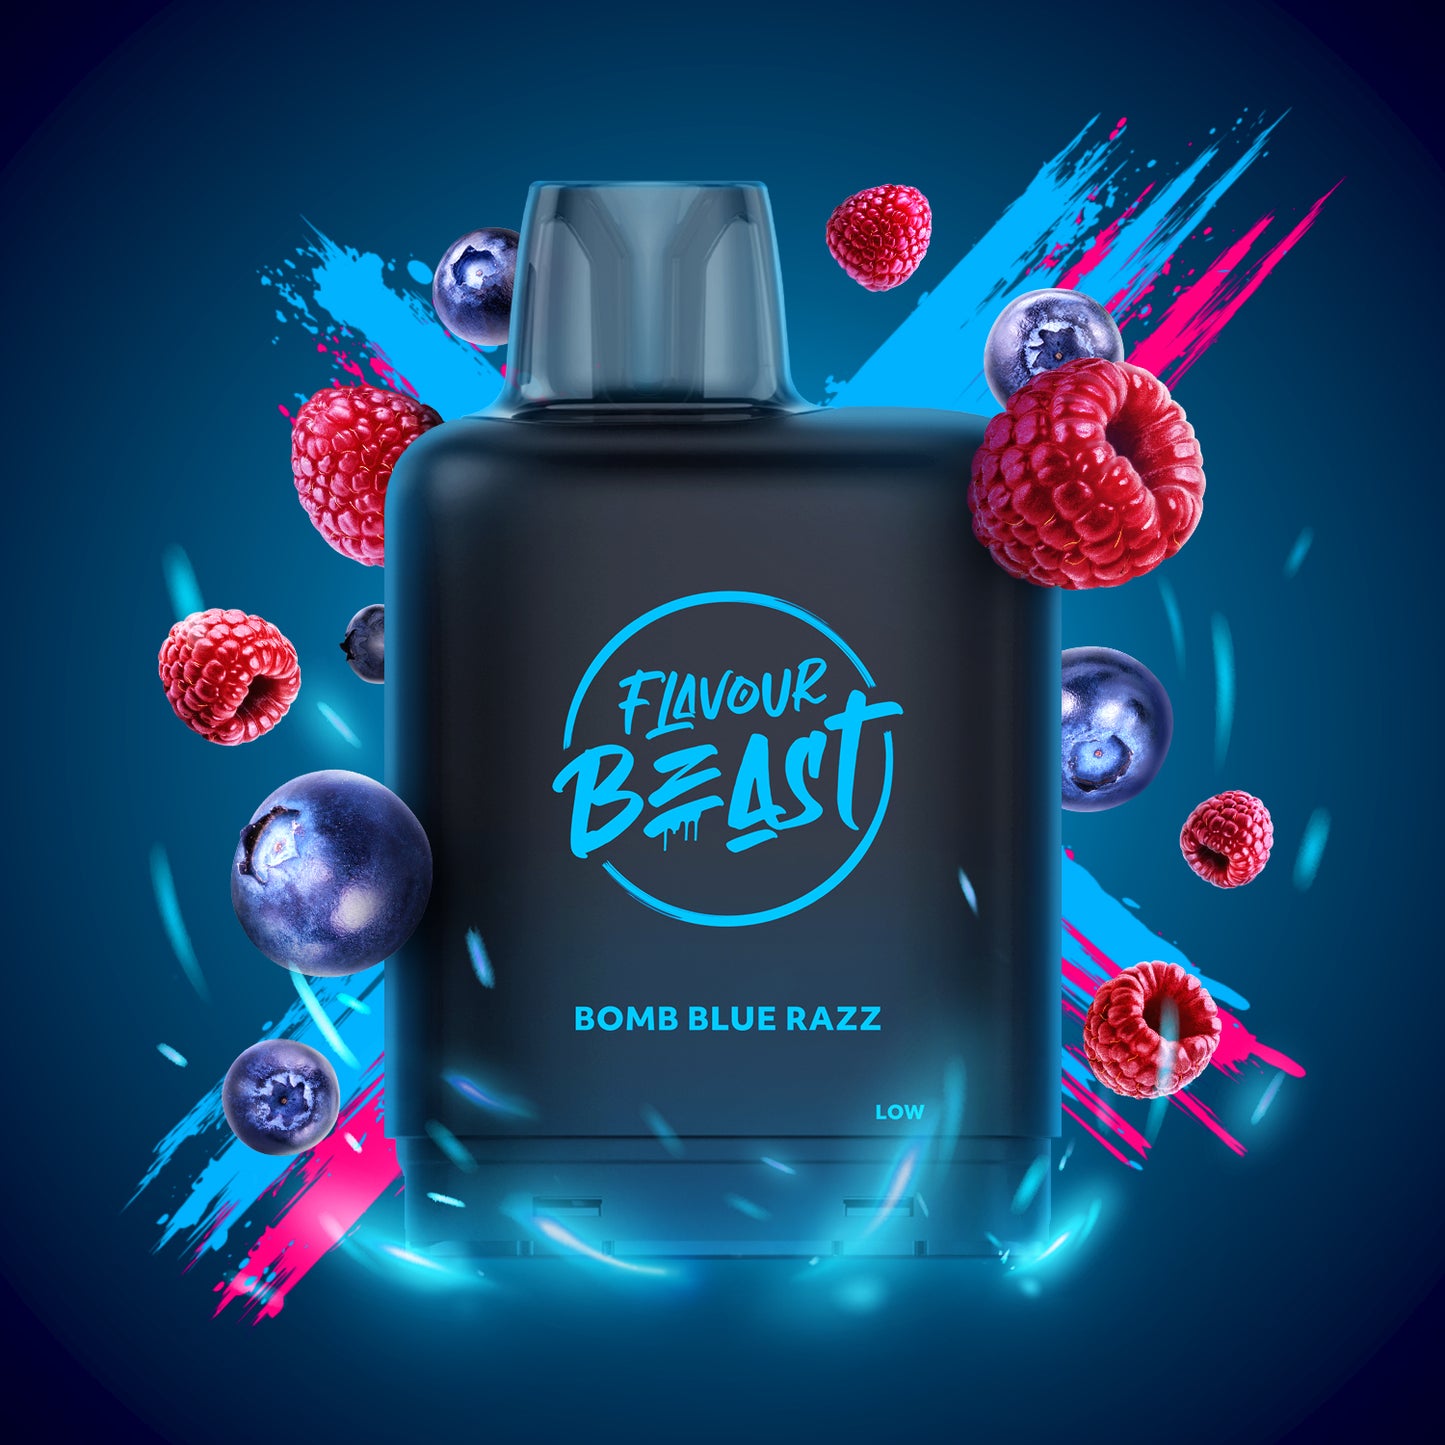 LEVEL X Boost Flavour Beast